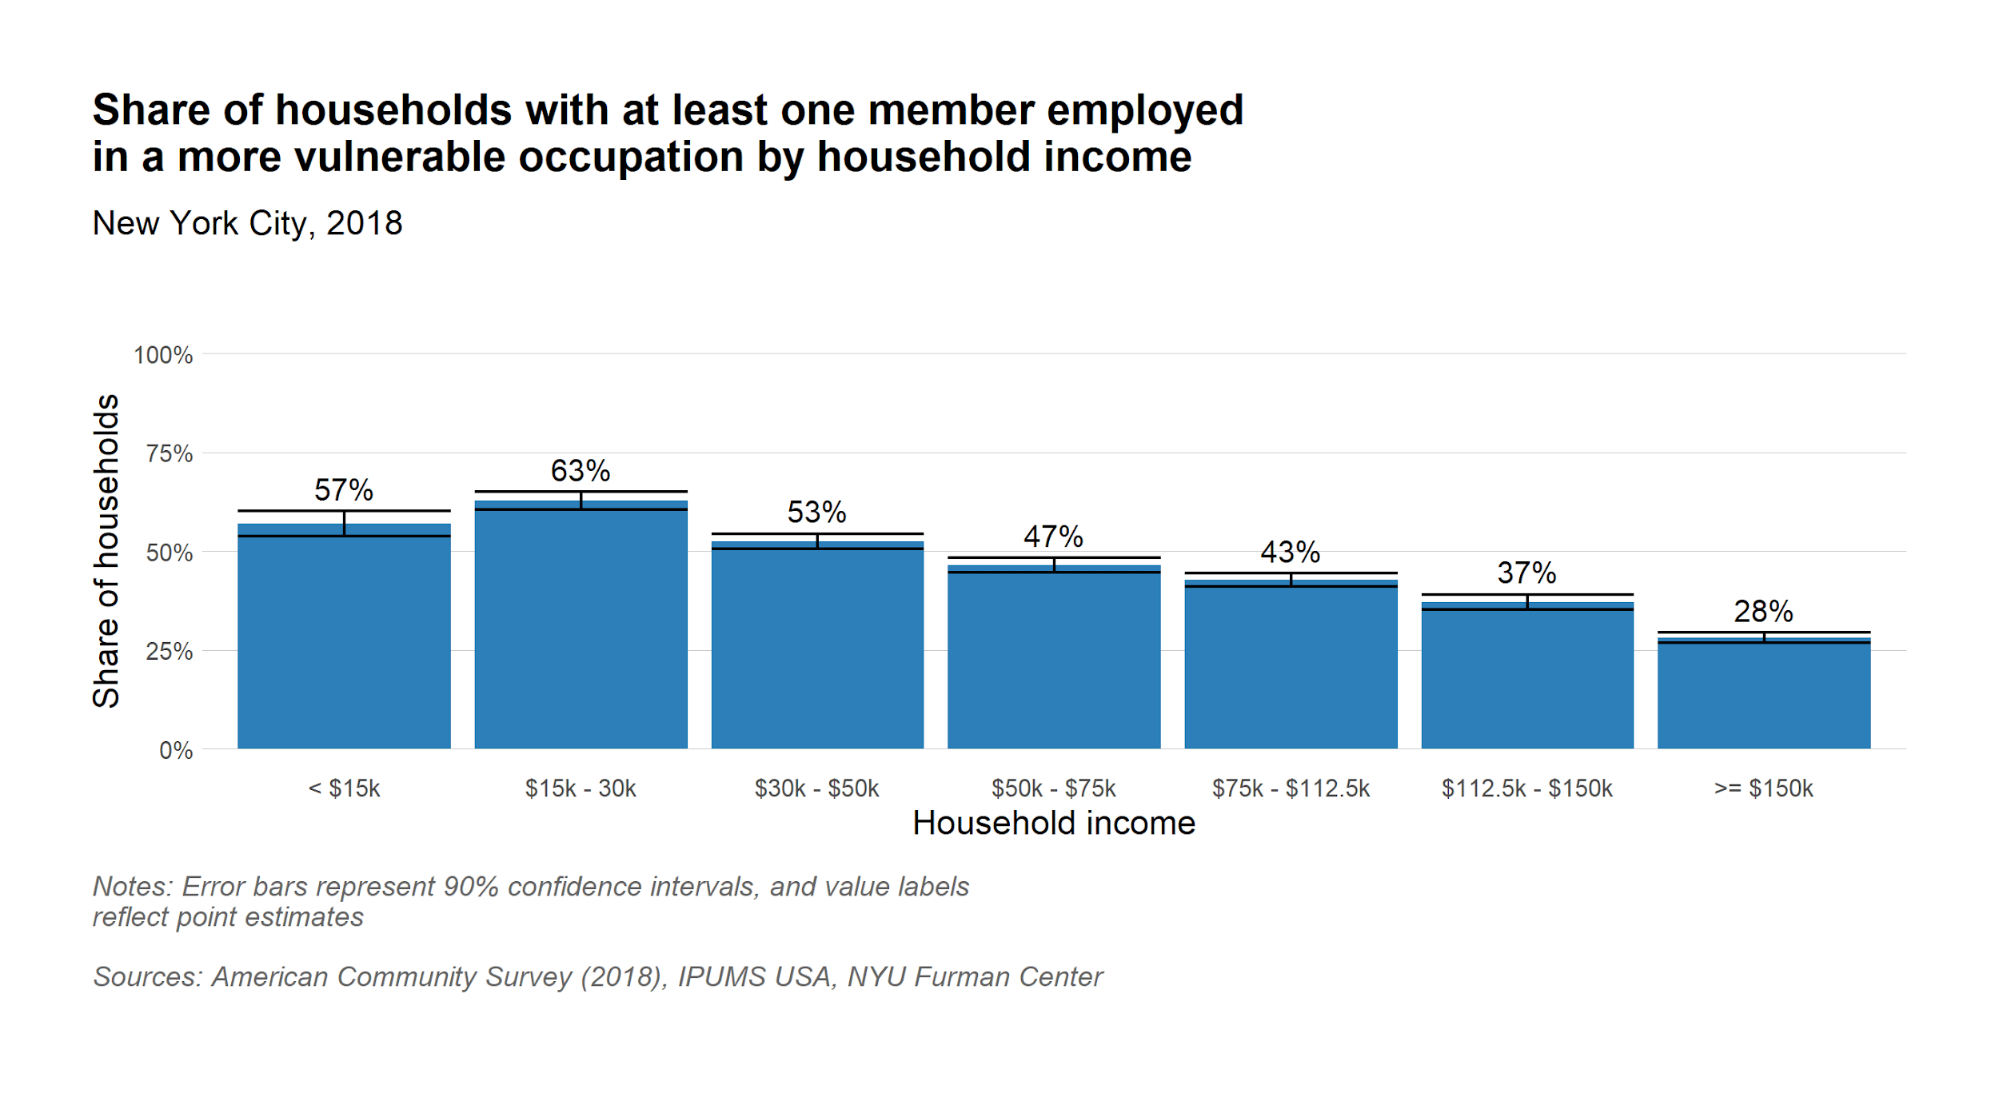 Share of households with at least one member in vulnerable occupation by household income